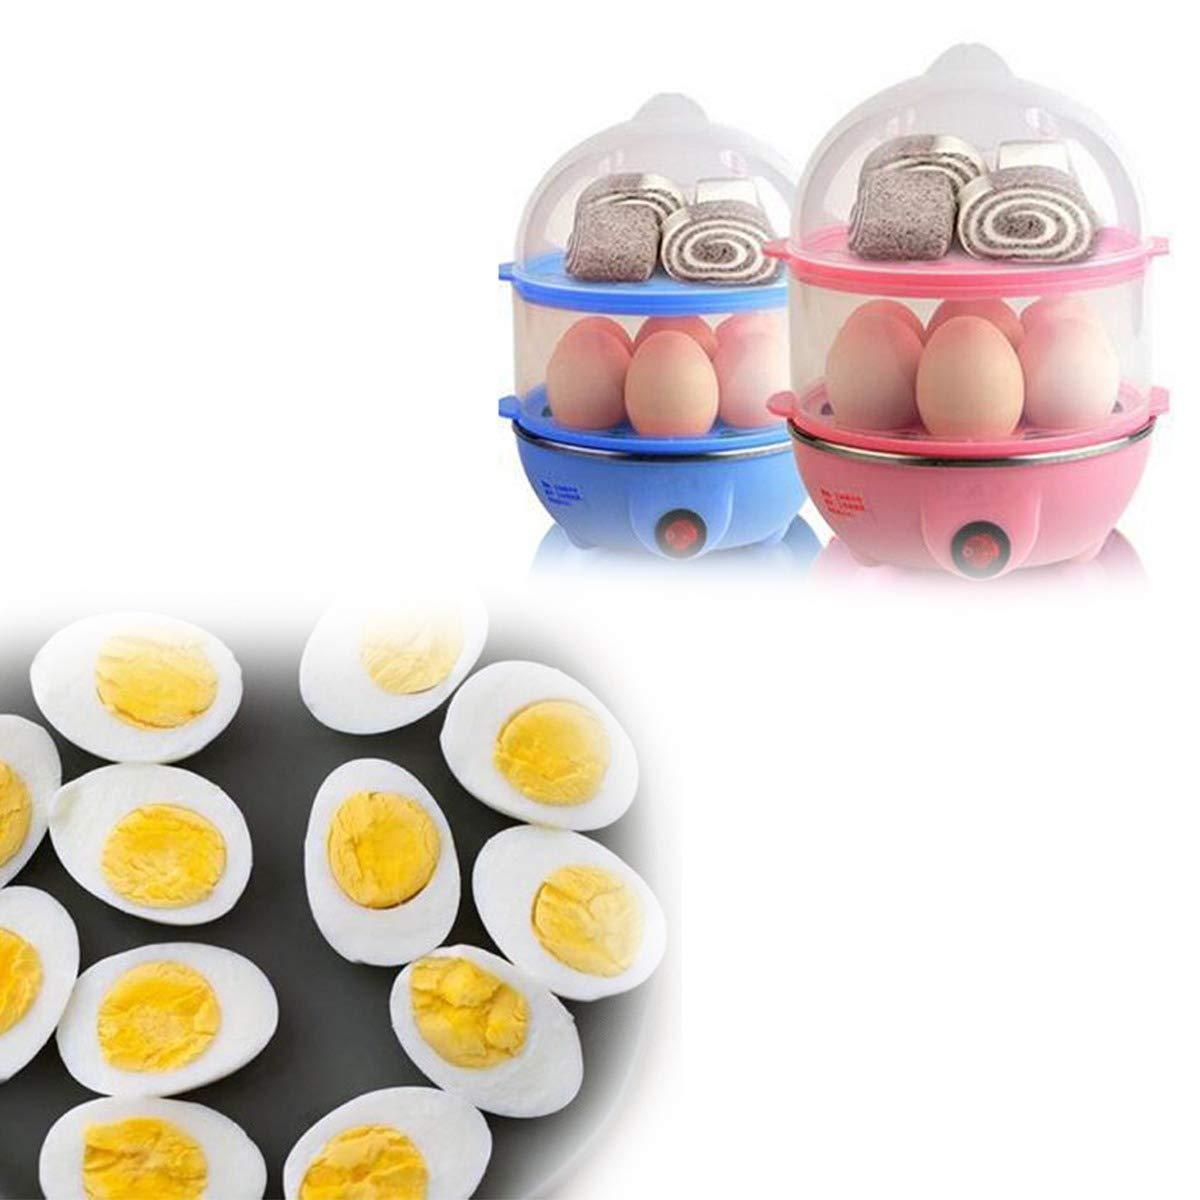 multi-function-electric-2-layer-egg-boiler-cooker-and-steamer-cp-2213-egg-cooker-multicolor-14-eggs